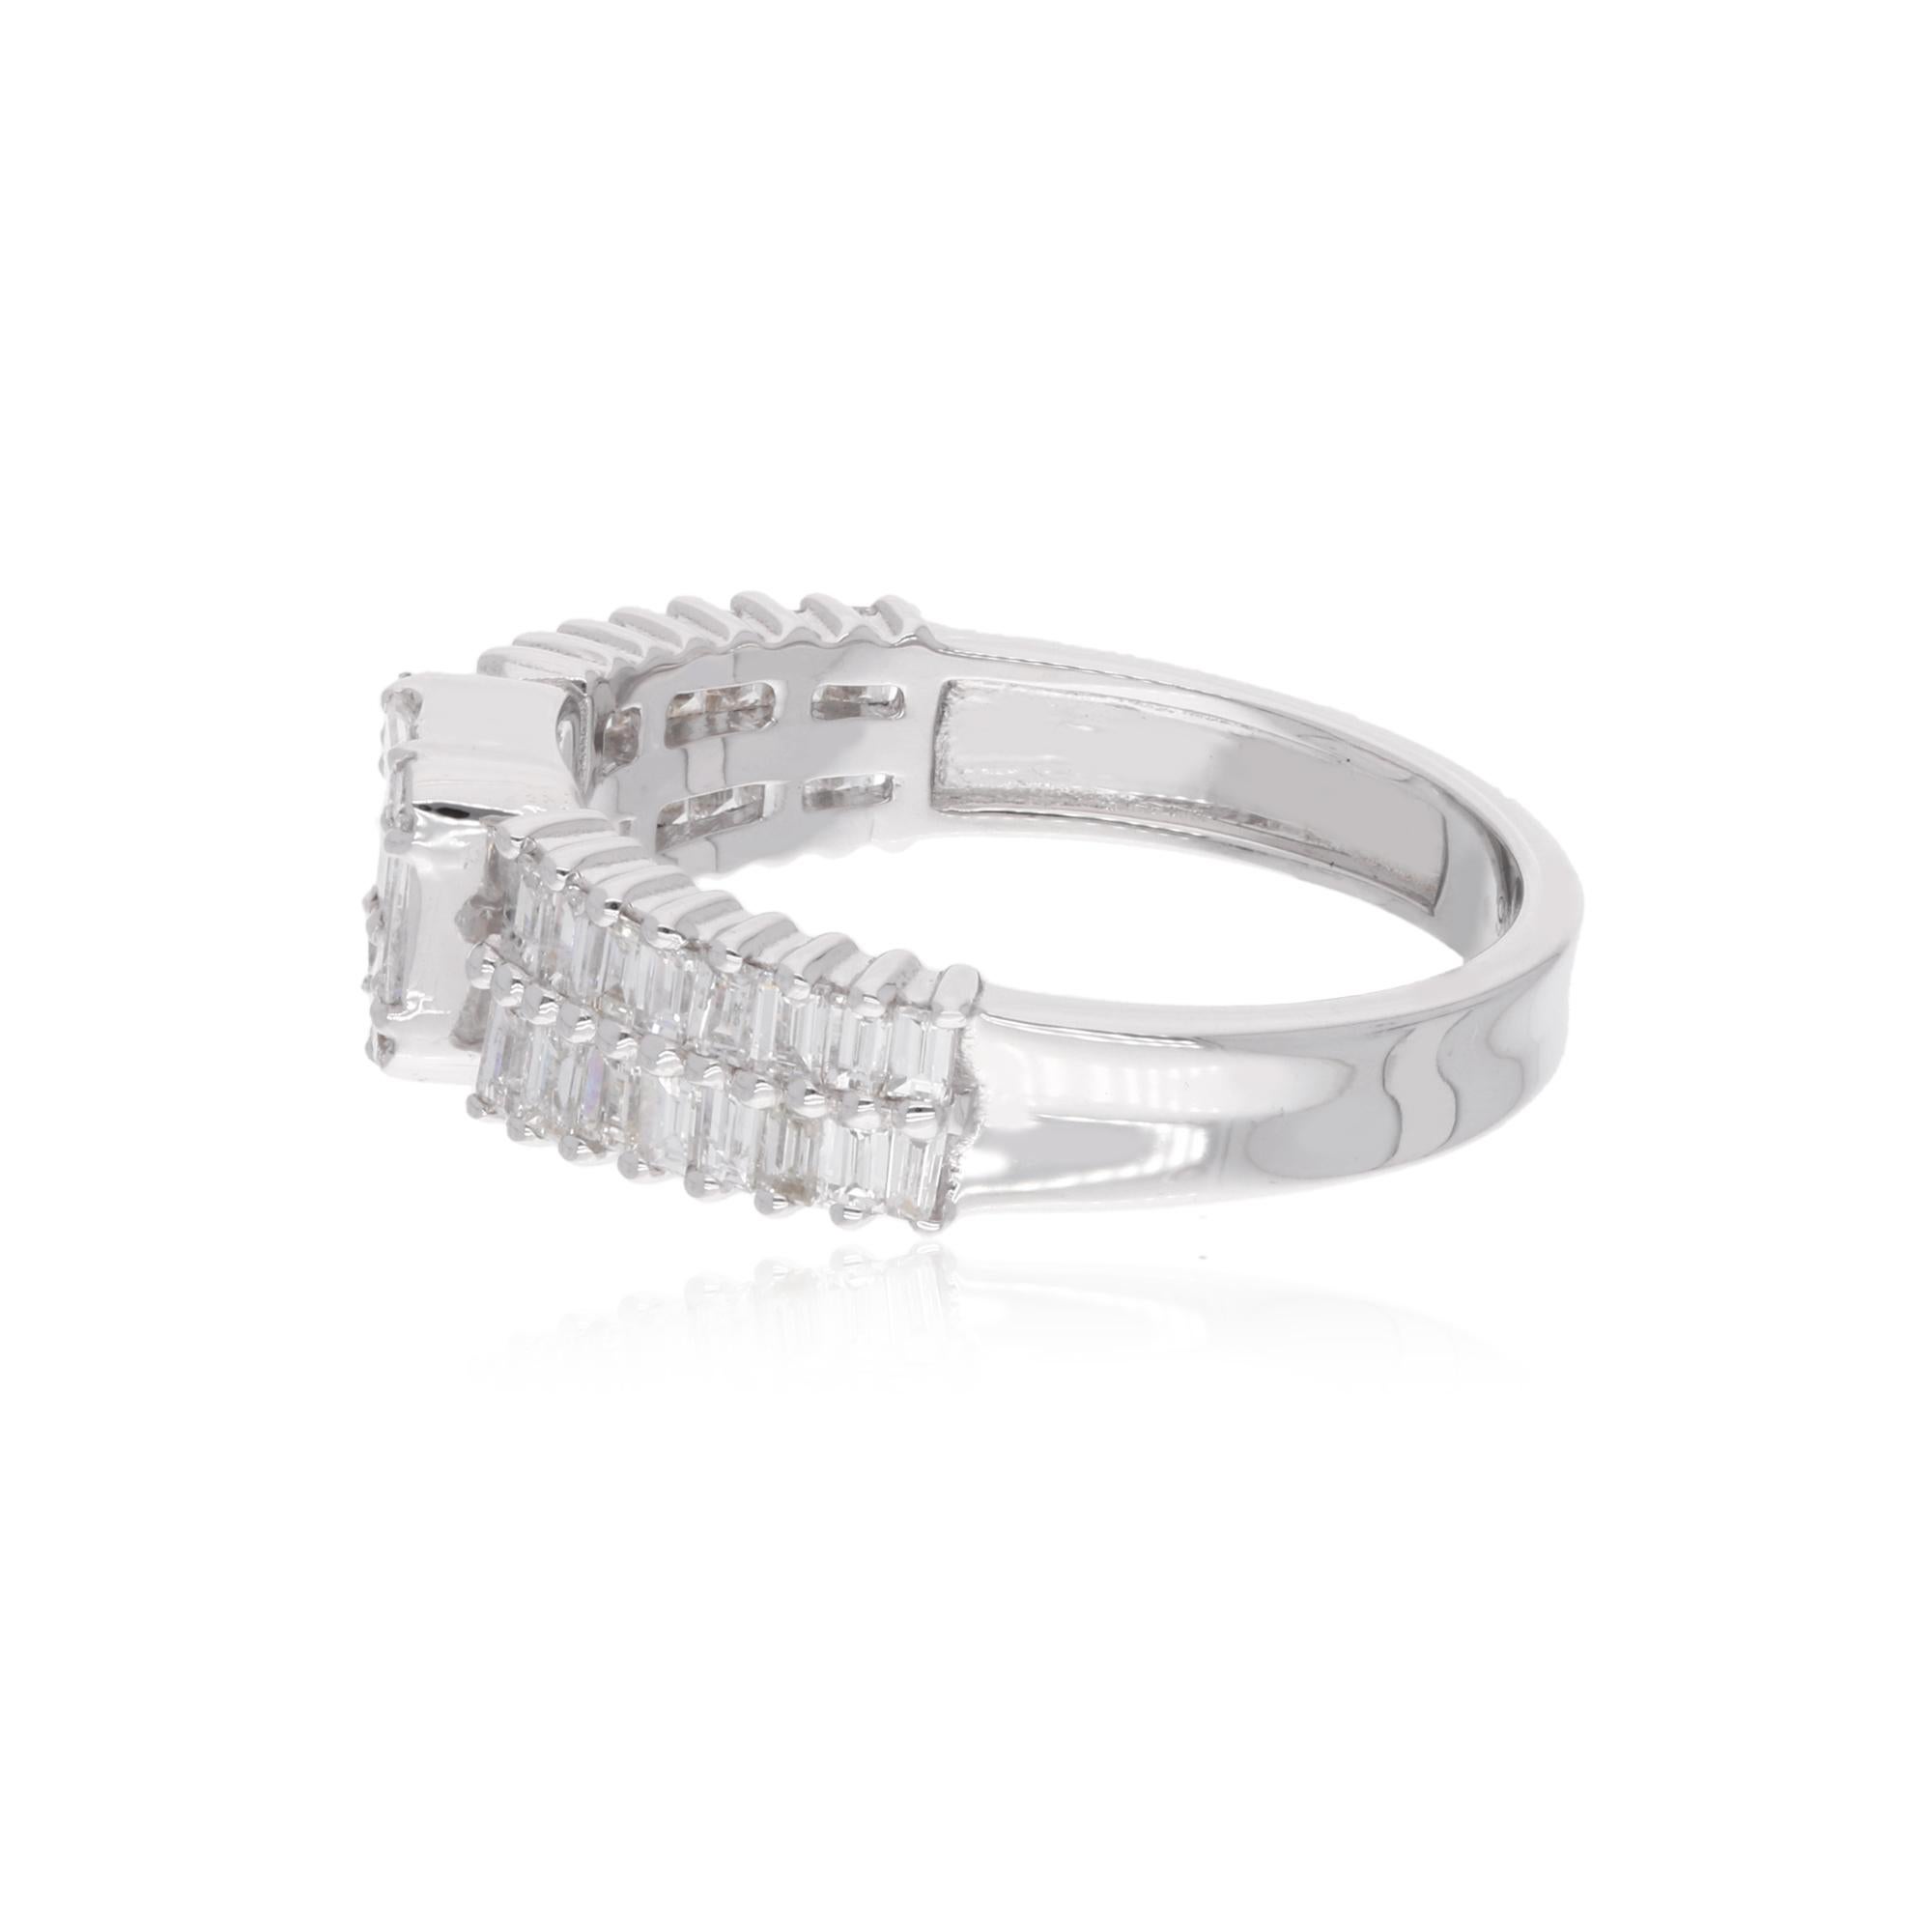 Introducing the epitome of sophistication and luxury - the 0.90 Carat Baguette Round Diamond Band Ring, a masterpiece of fine jewelry crafted to captivate and enchant. Meticulously handcrafted from exquisite 18 karat white gold, this ring exudes